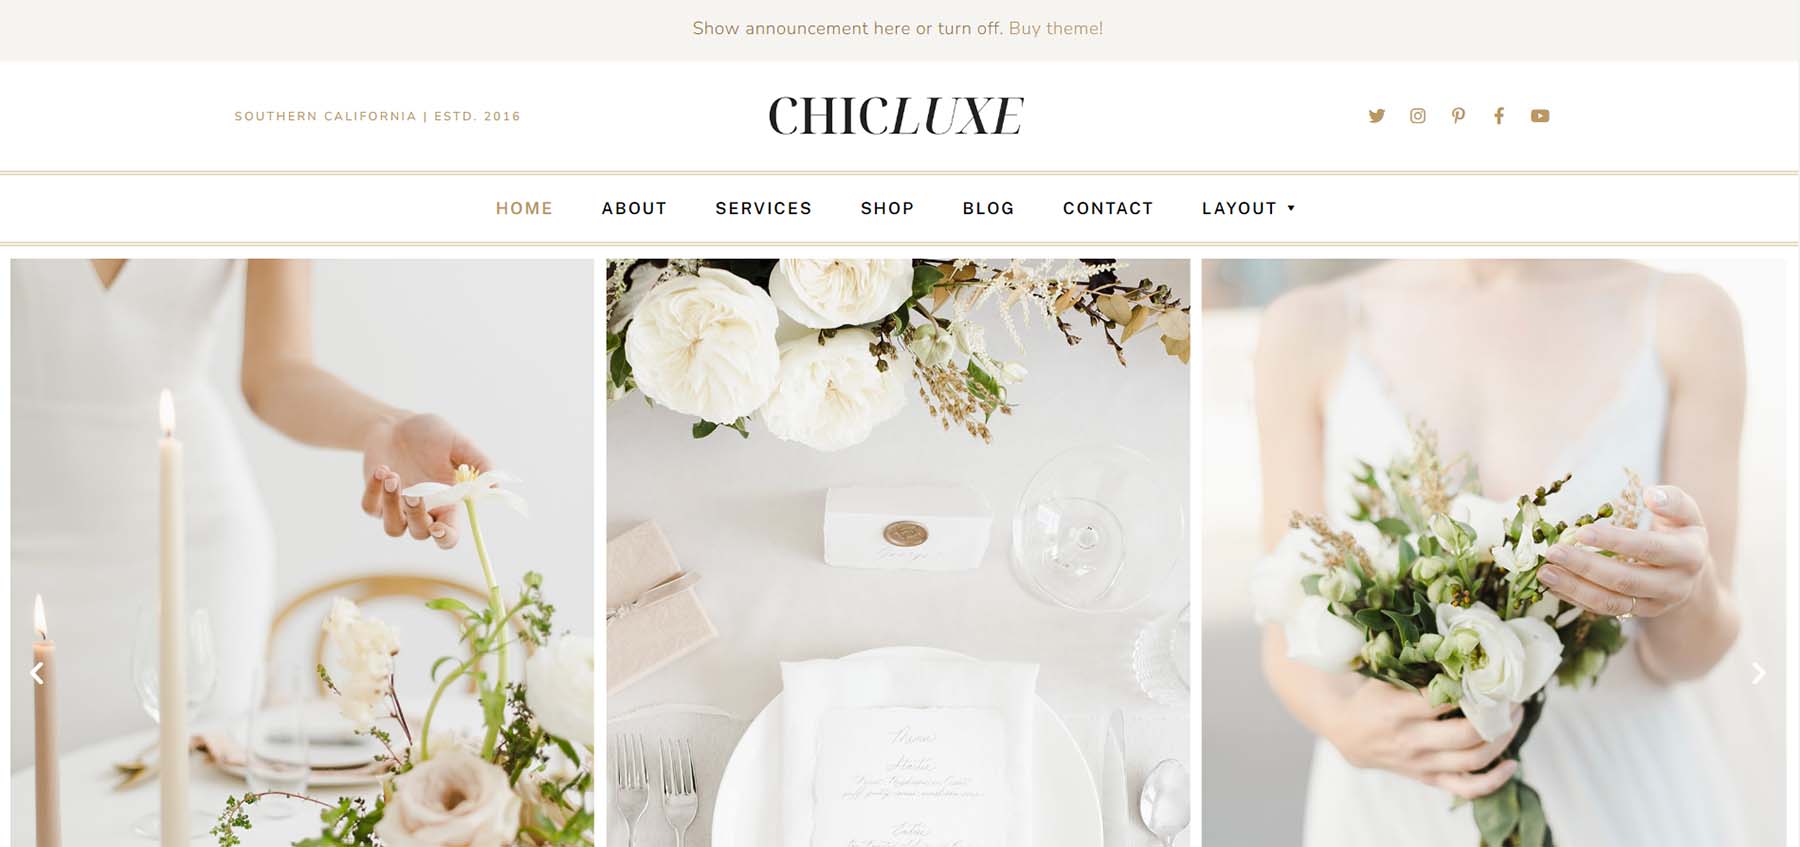 ChicLuxe, one of the best WordPress Wedding Themes for Wedding Professionals